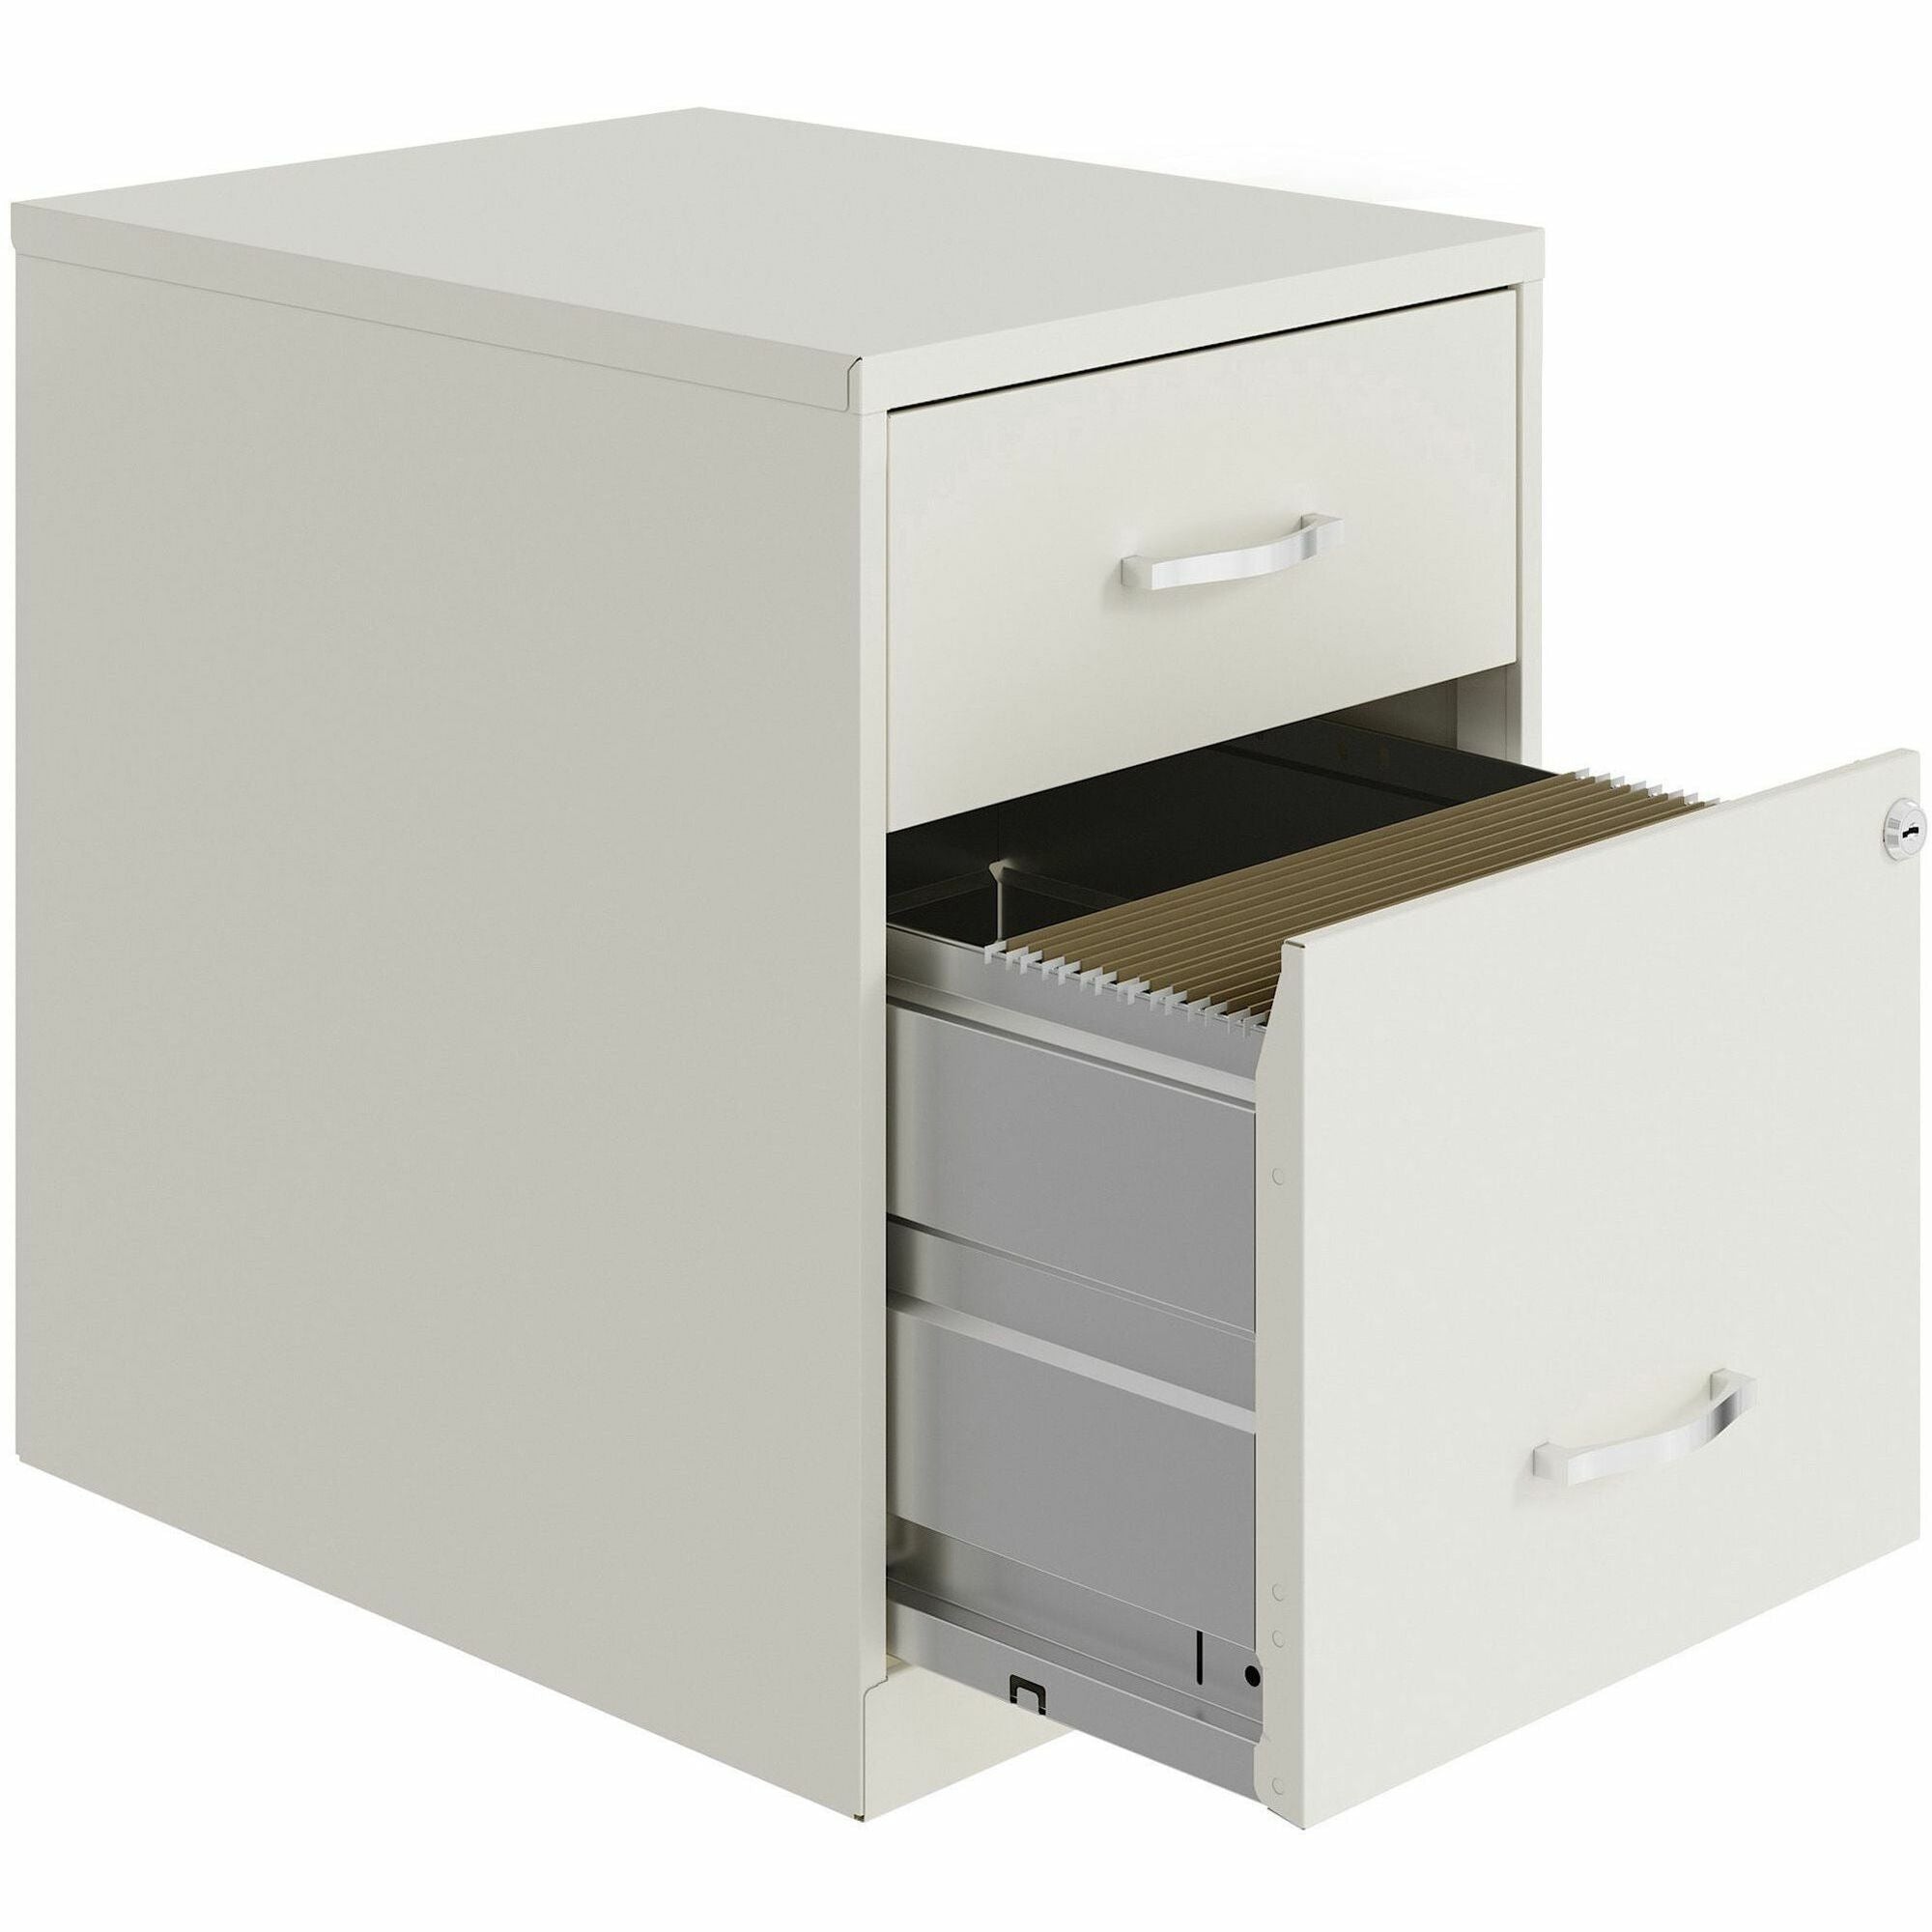 nusparc-file-cabinet-142-x-18-x-19-2-x-drawers-for-file-box-letter-vertical-locking-drawer-glide-suspension-nonporous-surface-white-baked-enamel-steel_nprvf218gawe - 1